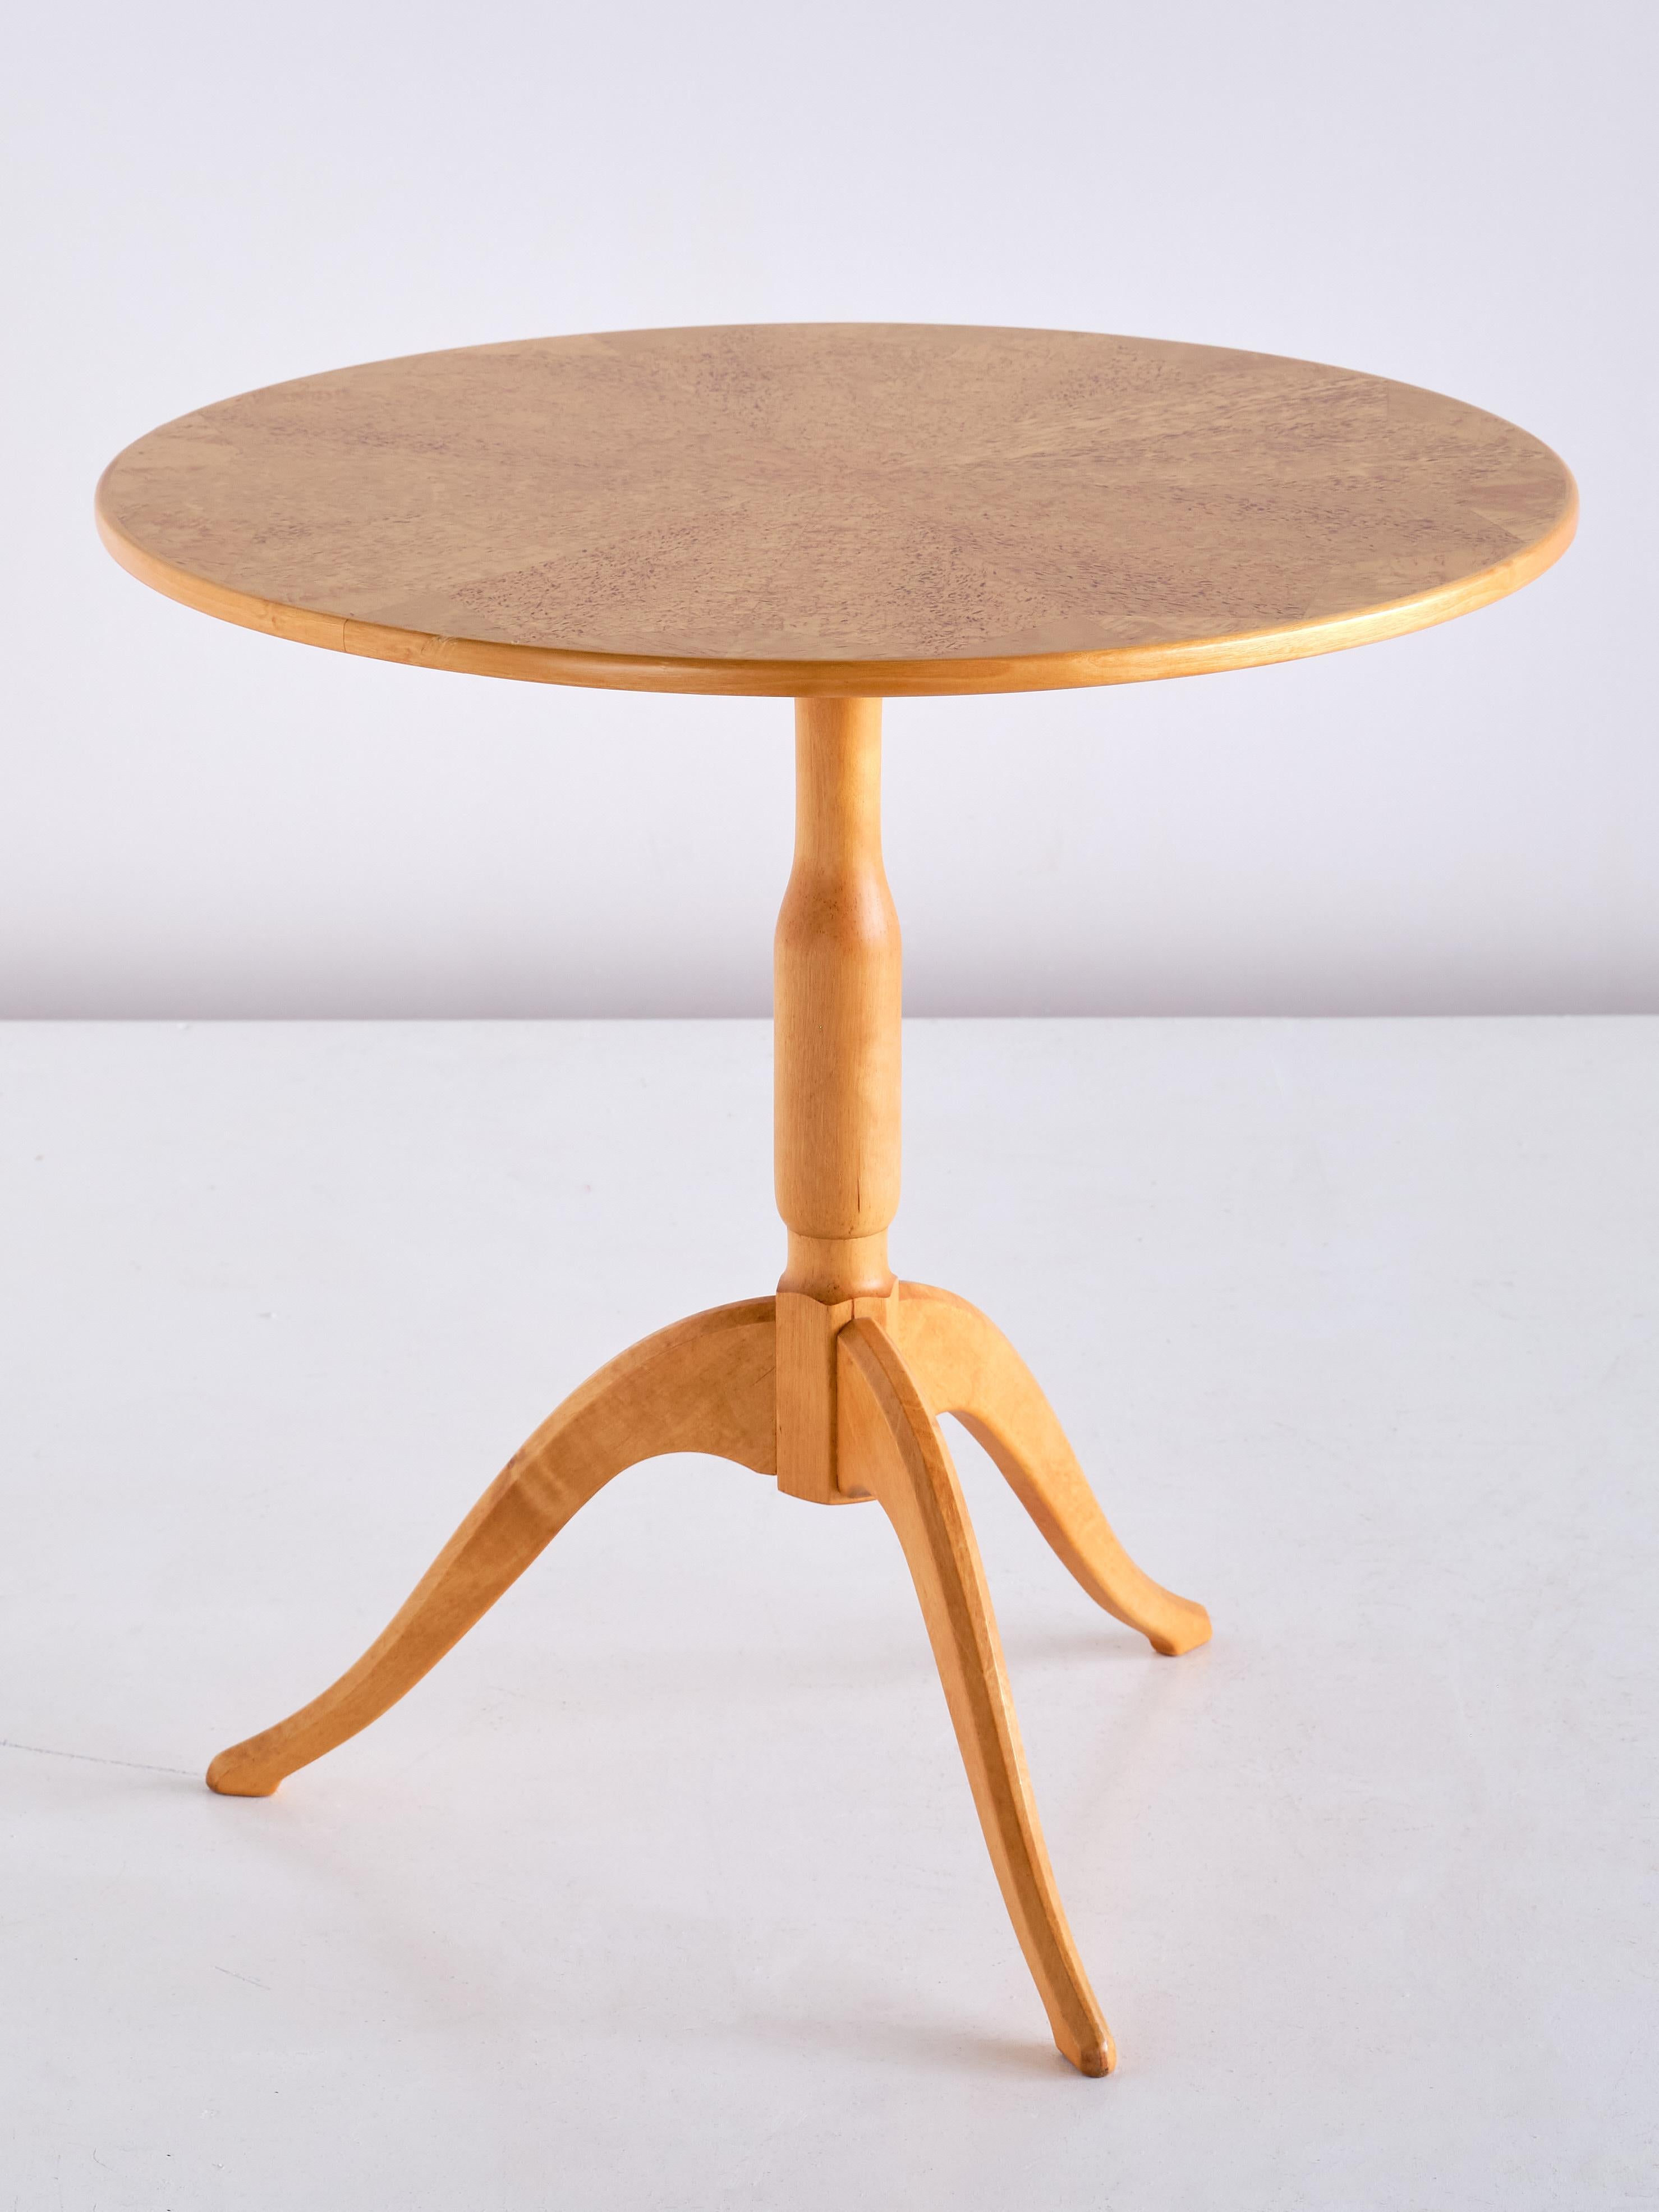 This elegant side table was designed by Carl Malmsten in 1936 as part of his 'Berg' series of three-legged tables. This example was produced by Carl Malmsten in the early 1950s. The round table has a top in a beautifully veneered Masur birch wood.